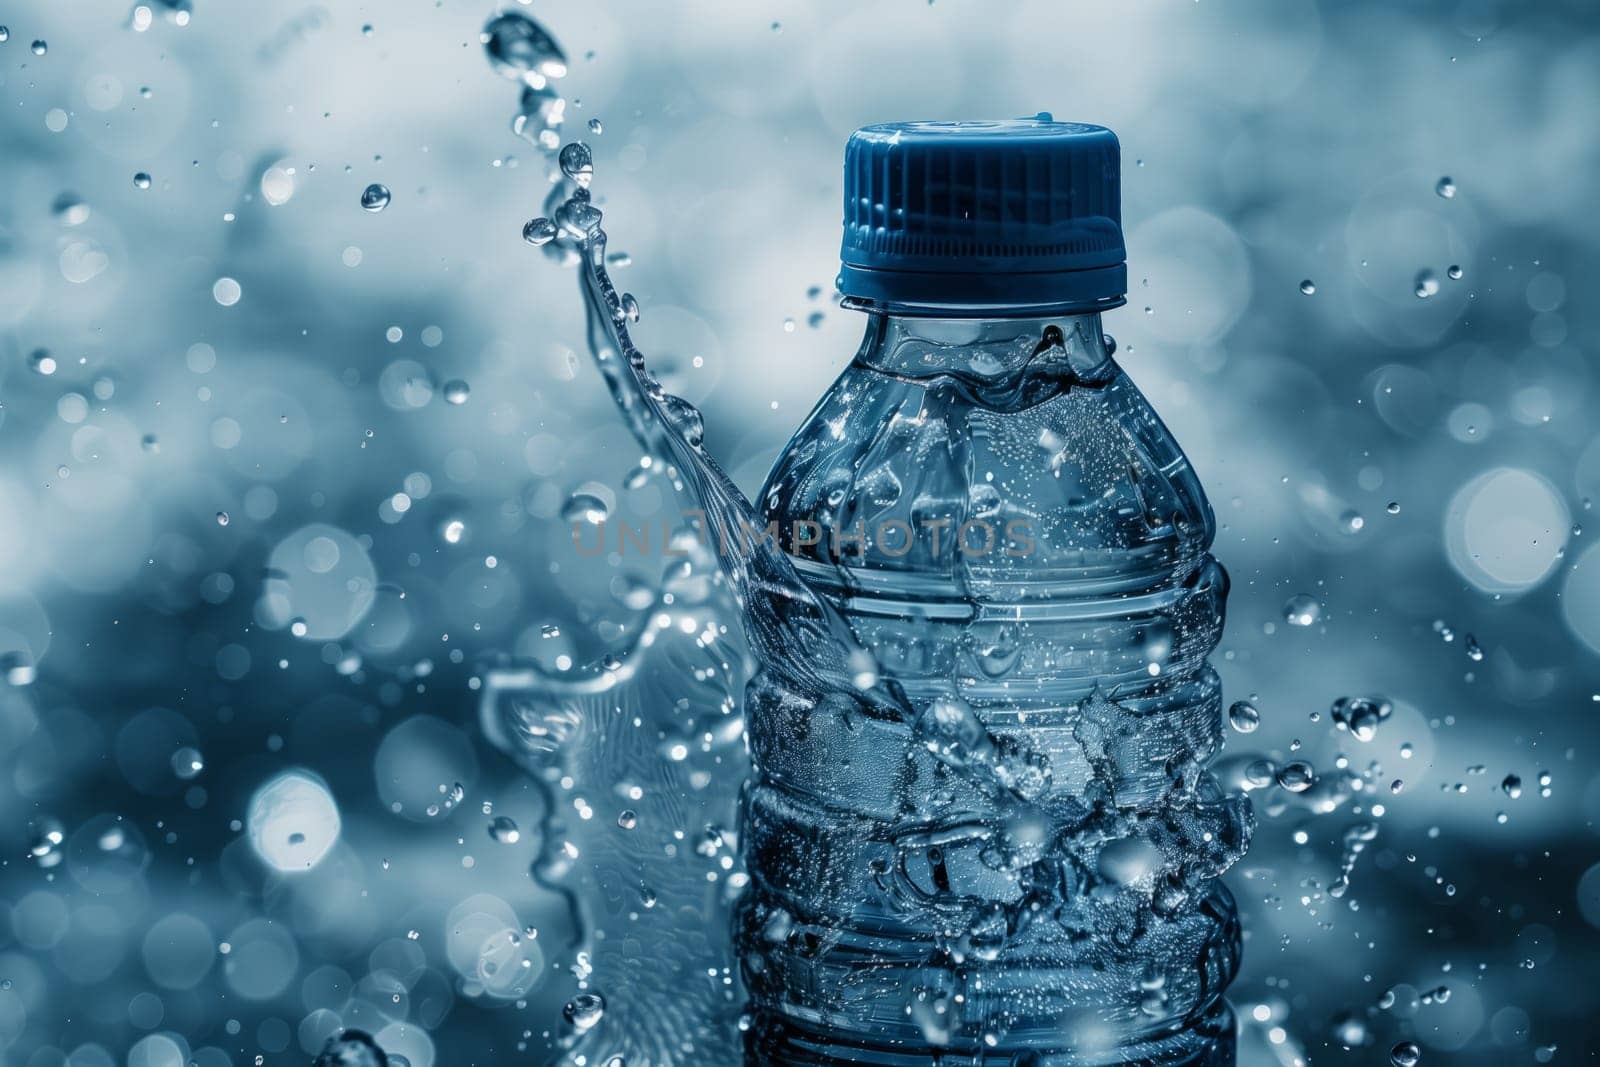 A plastic bottle filled with liquid is soaring through the air, its contents splashing in all directions. The drinkware contains refreshing drinking water, possibly mineral or bottled